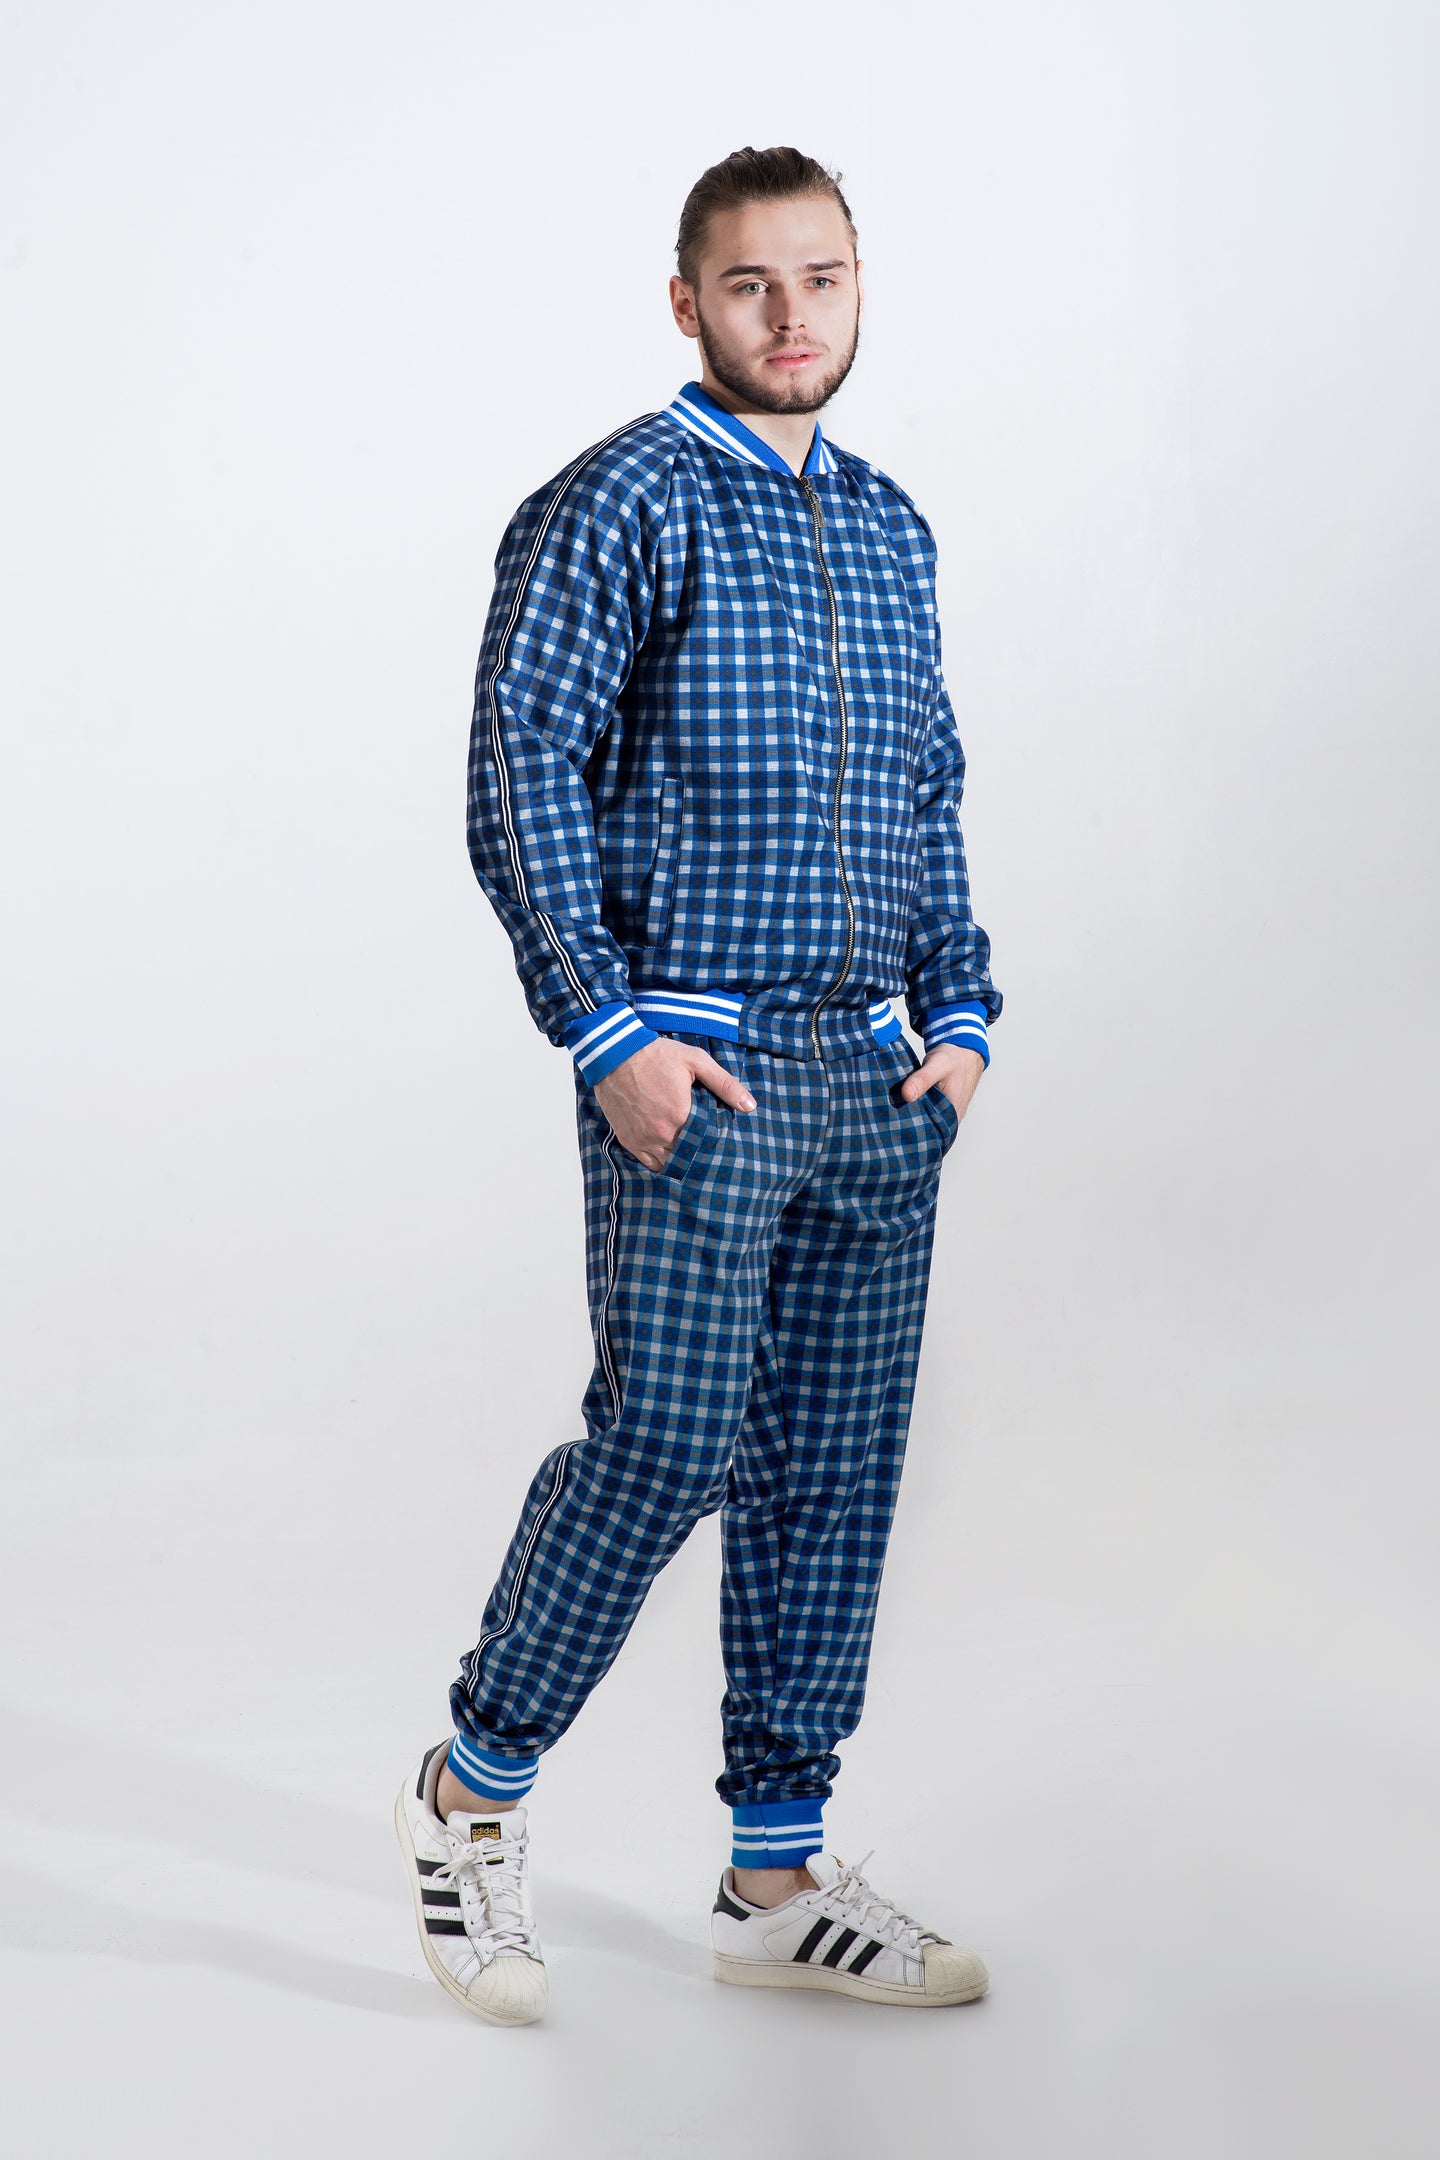 Checked Colin Farrell Coach Tracksuit - Plaid Tracksuits TheGentlemen™